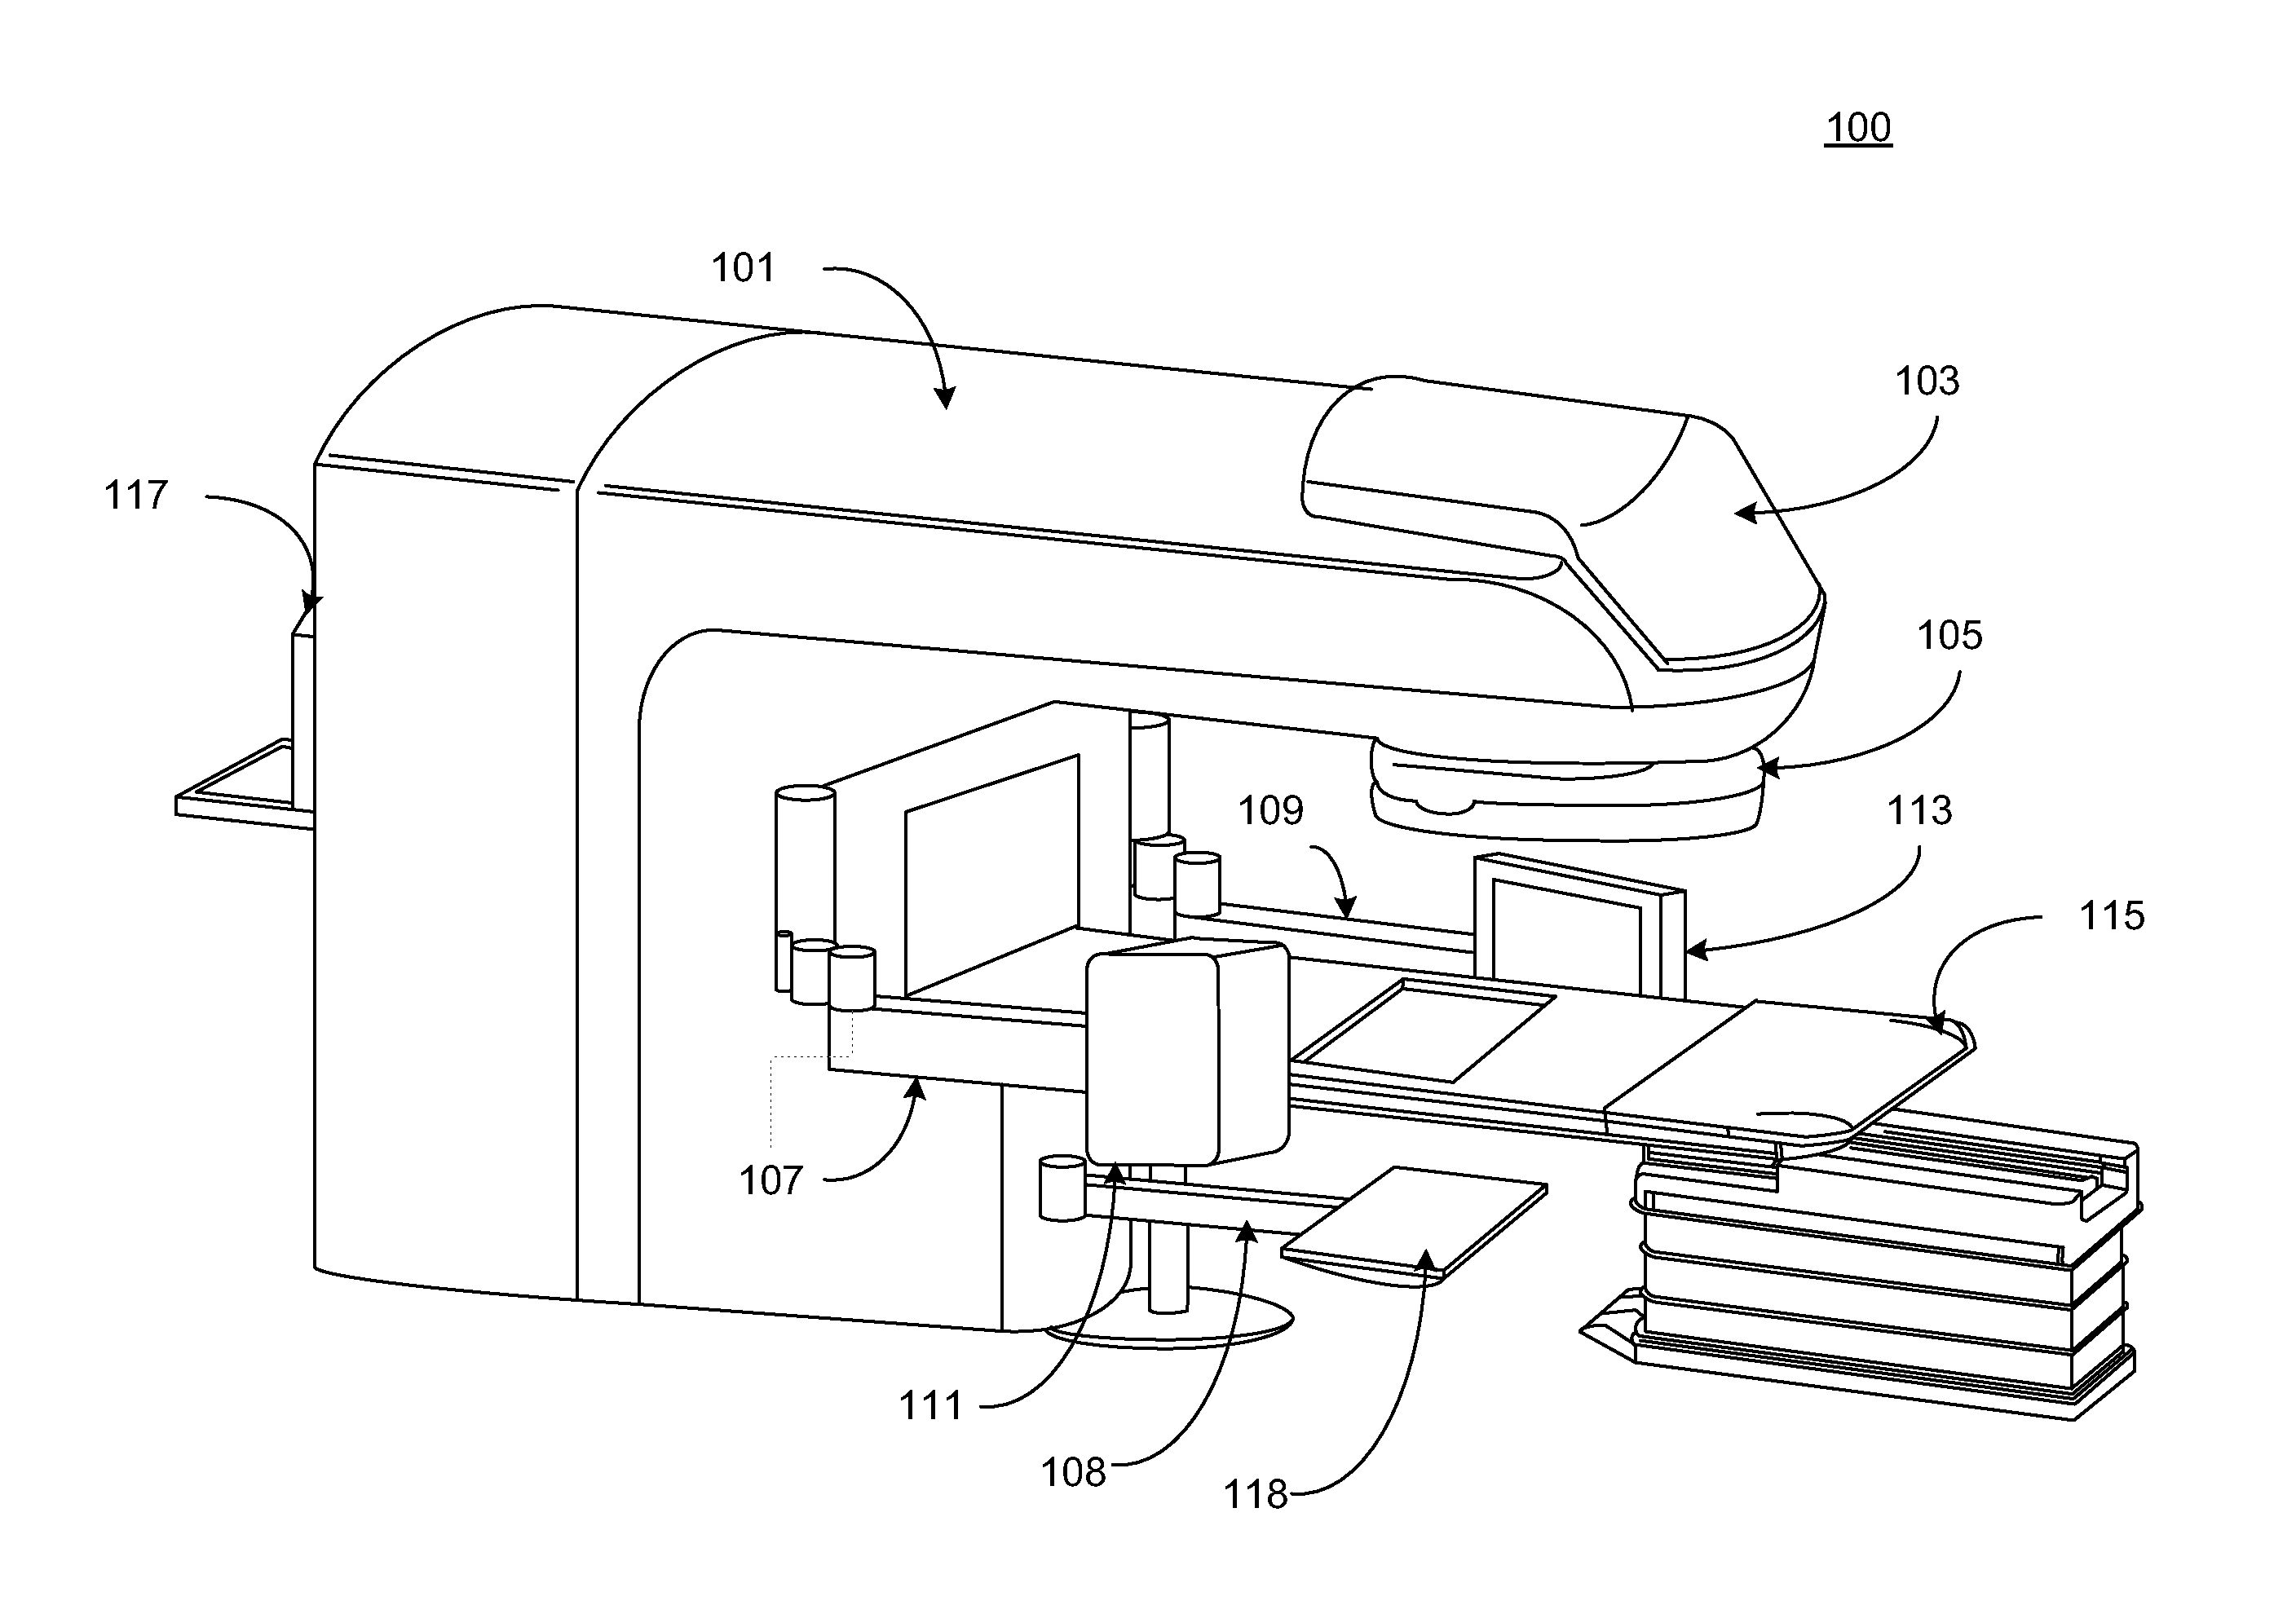 System and method for measuring x-ray beam profile using an area detector